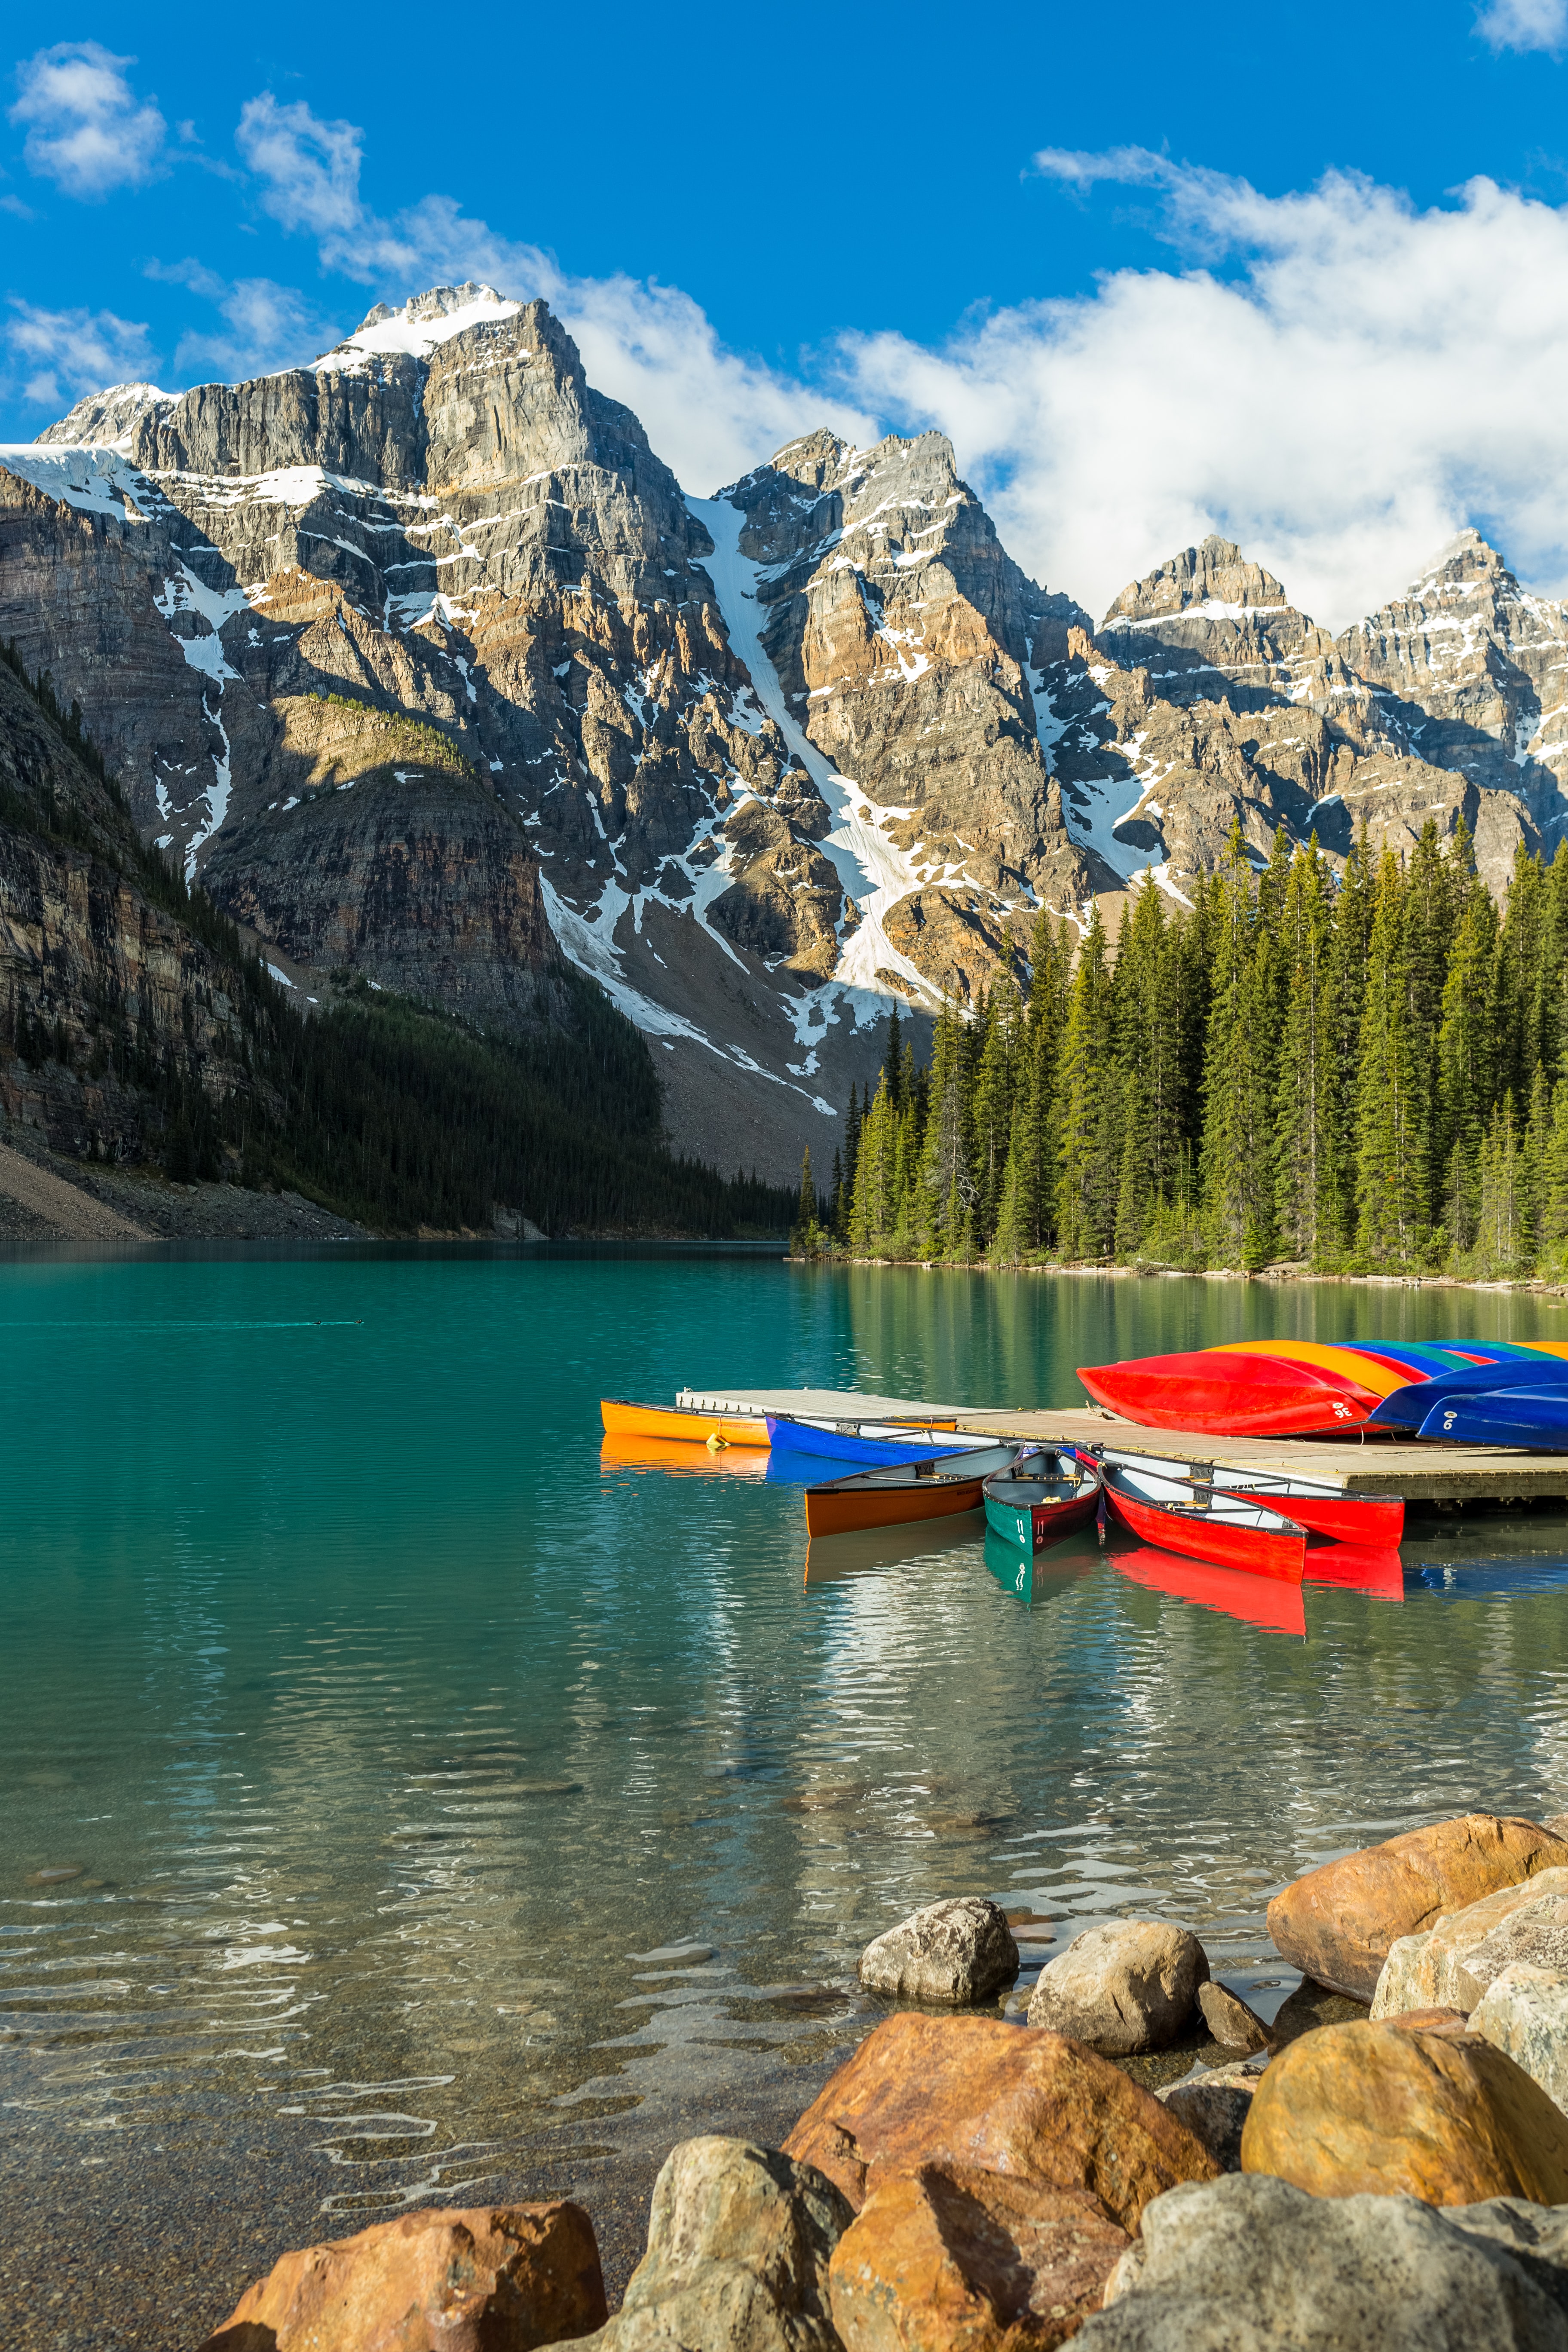 mountains, boats, water, nature, forest